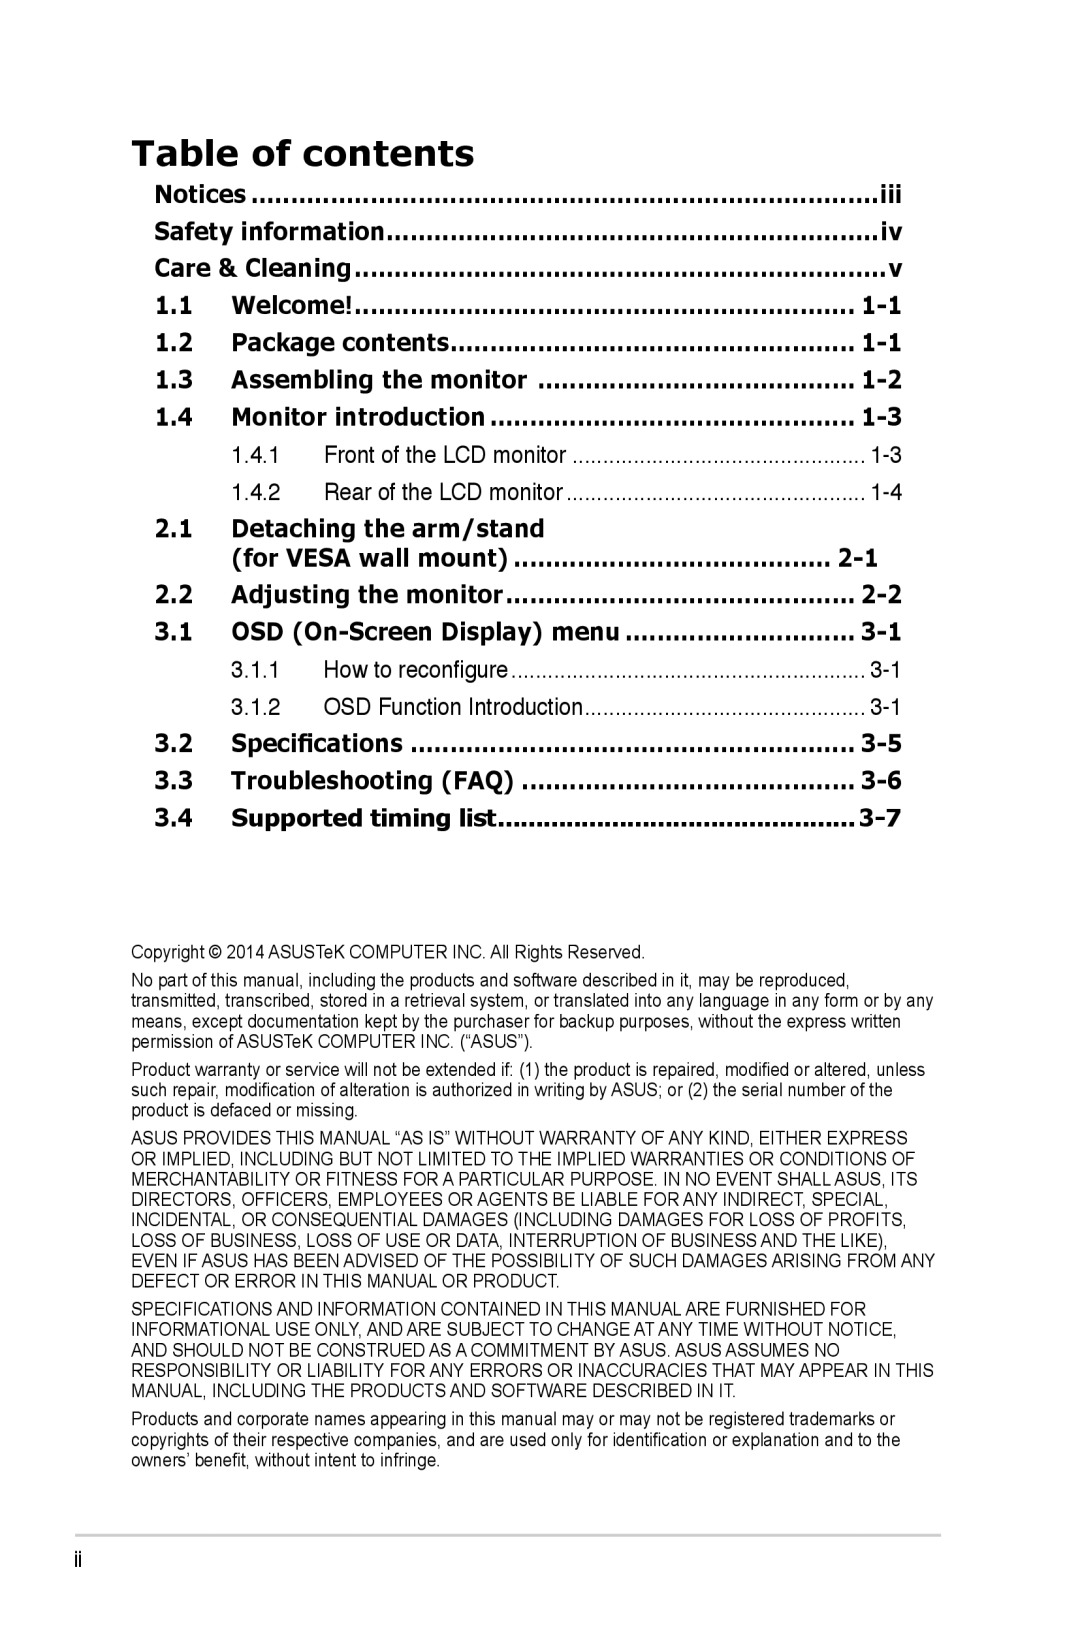 Asus VB199 Series manual Table of contents, Detaching the arm/stand, 3.1.1, 3.1.2 